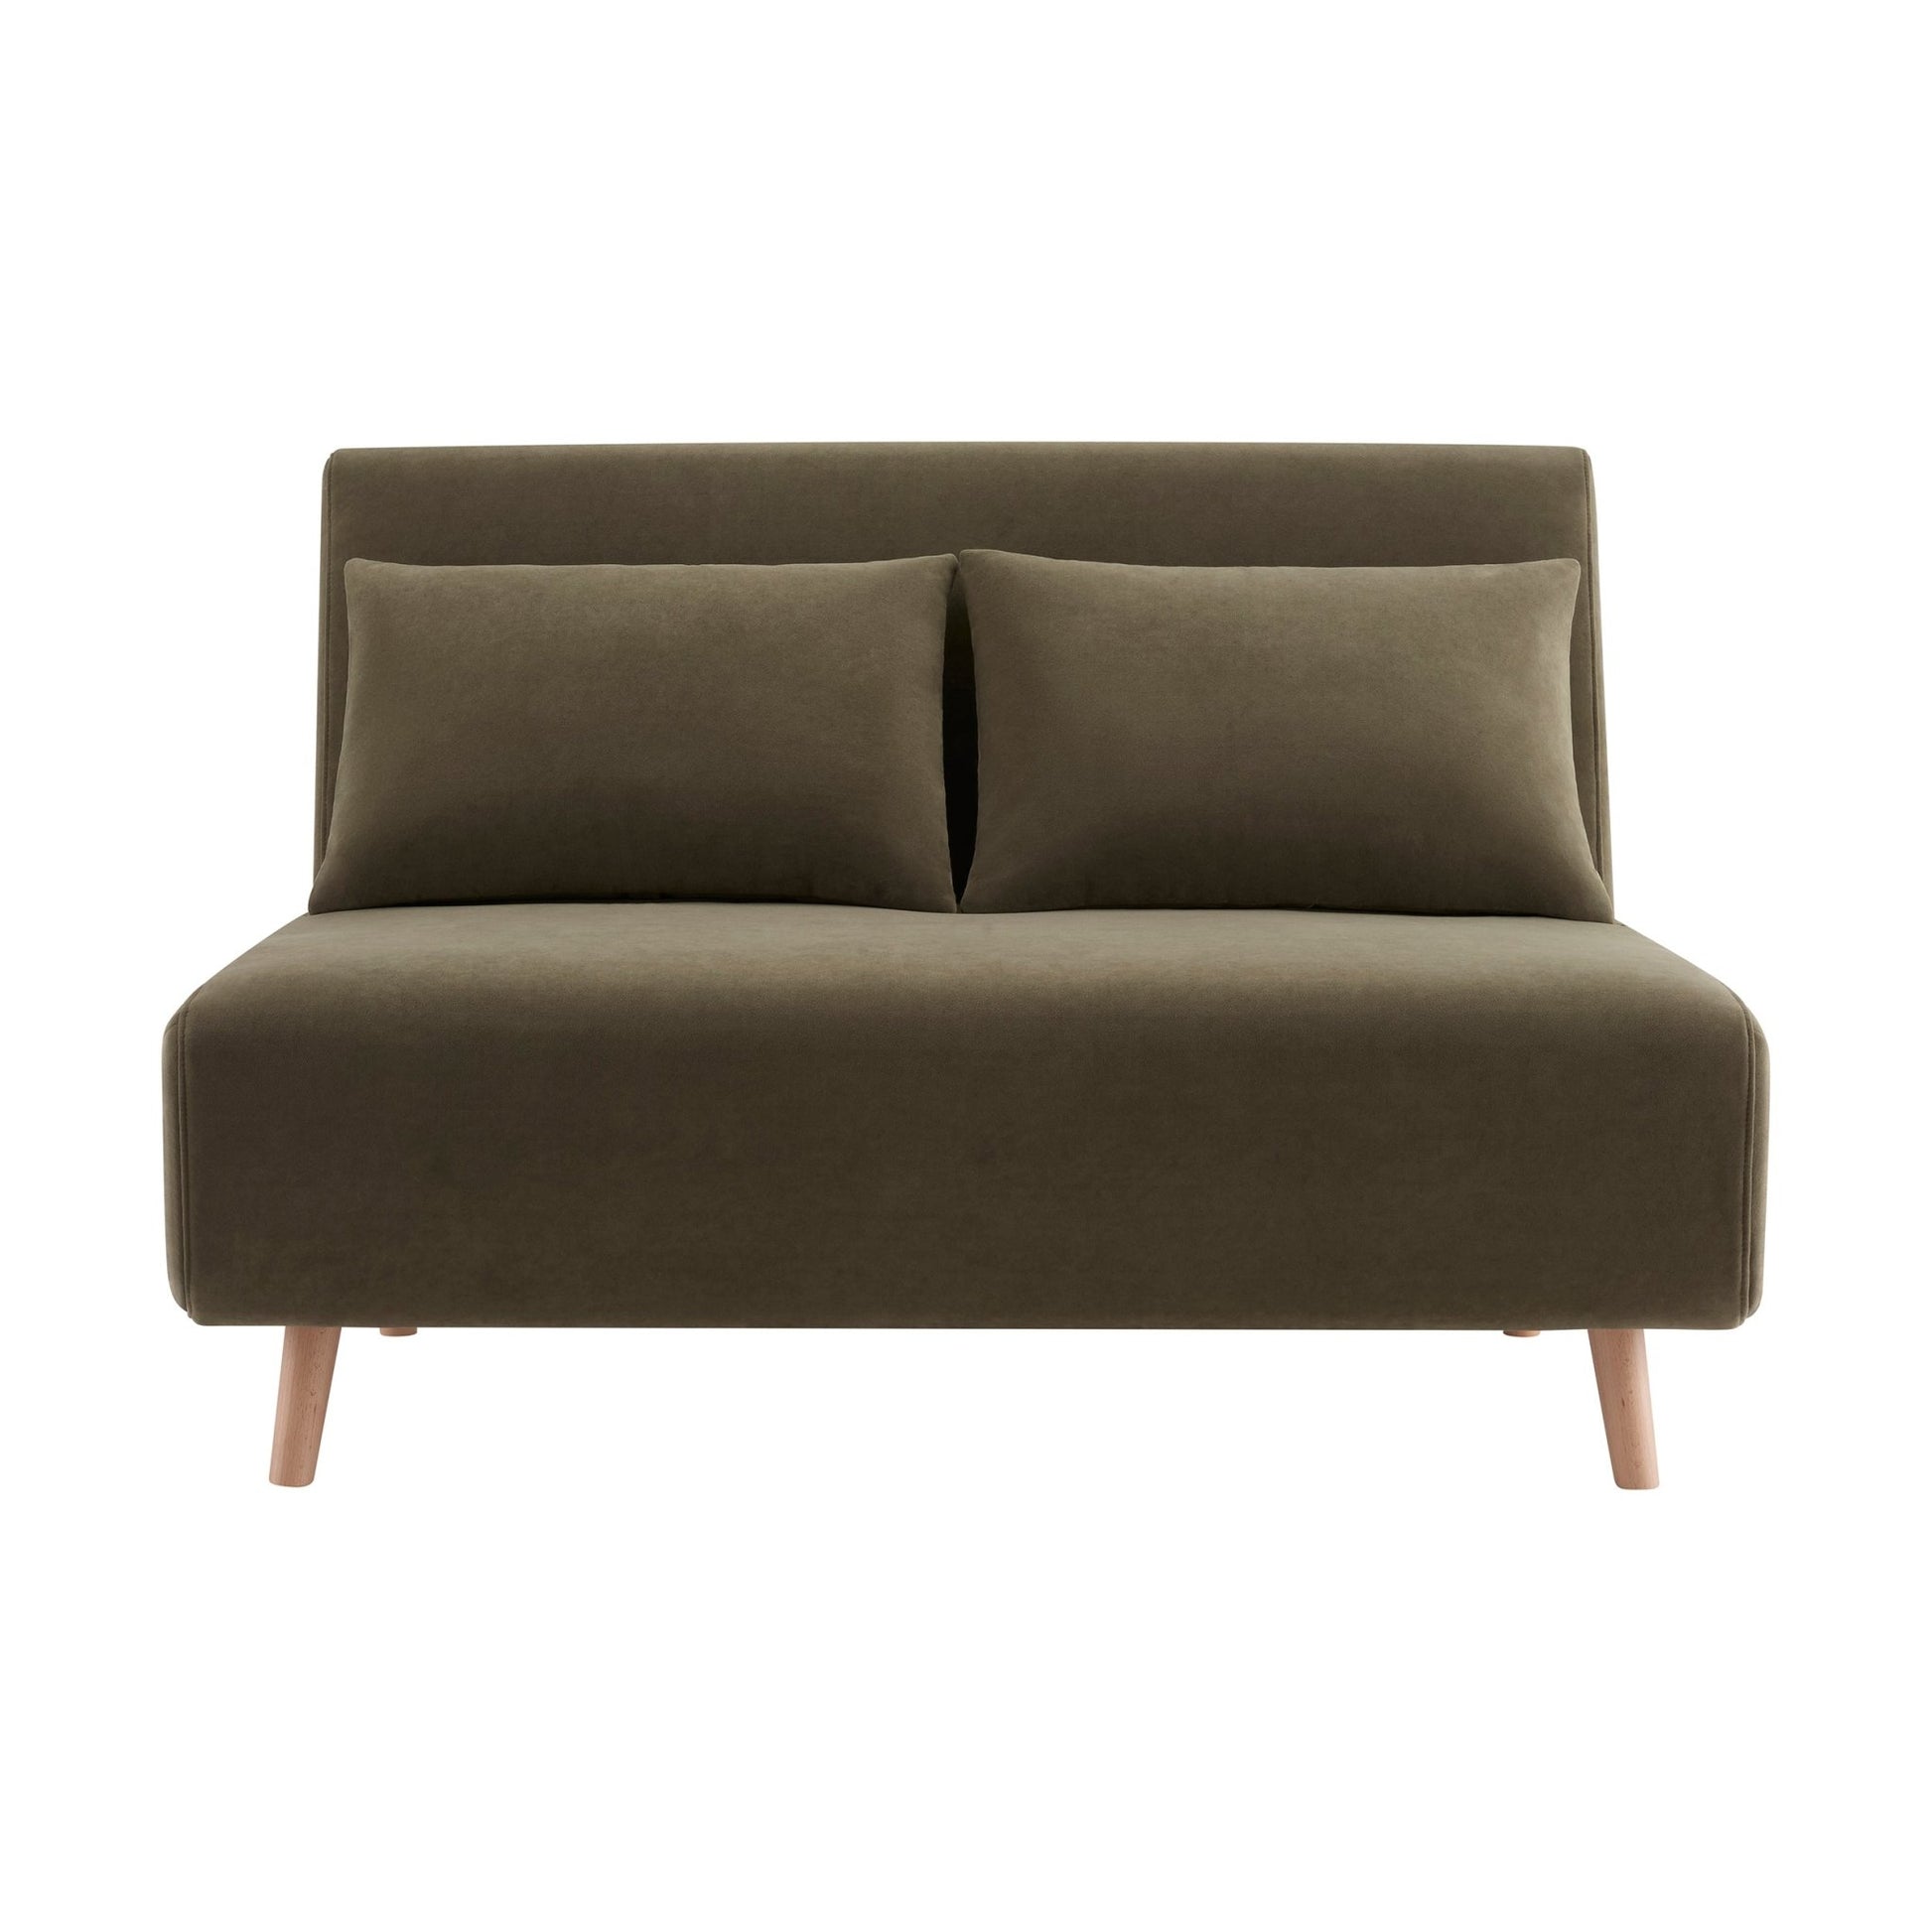 Seattle Double Click Clack Sofa Bed - Olive Green - DUSK